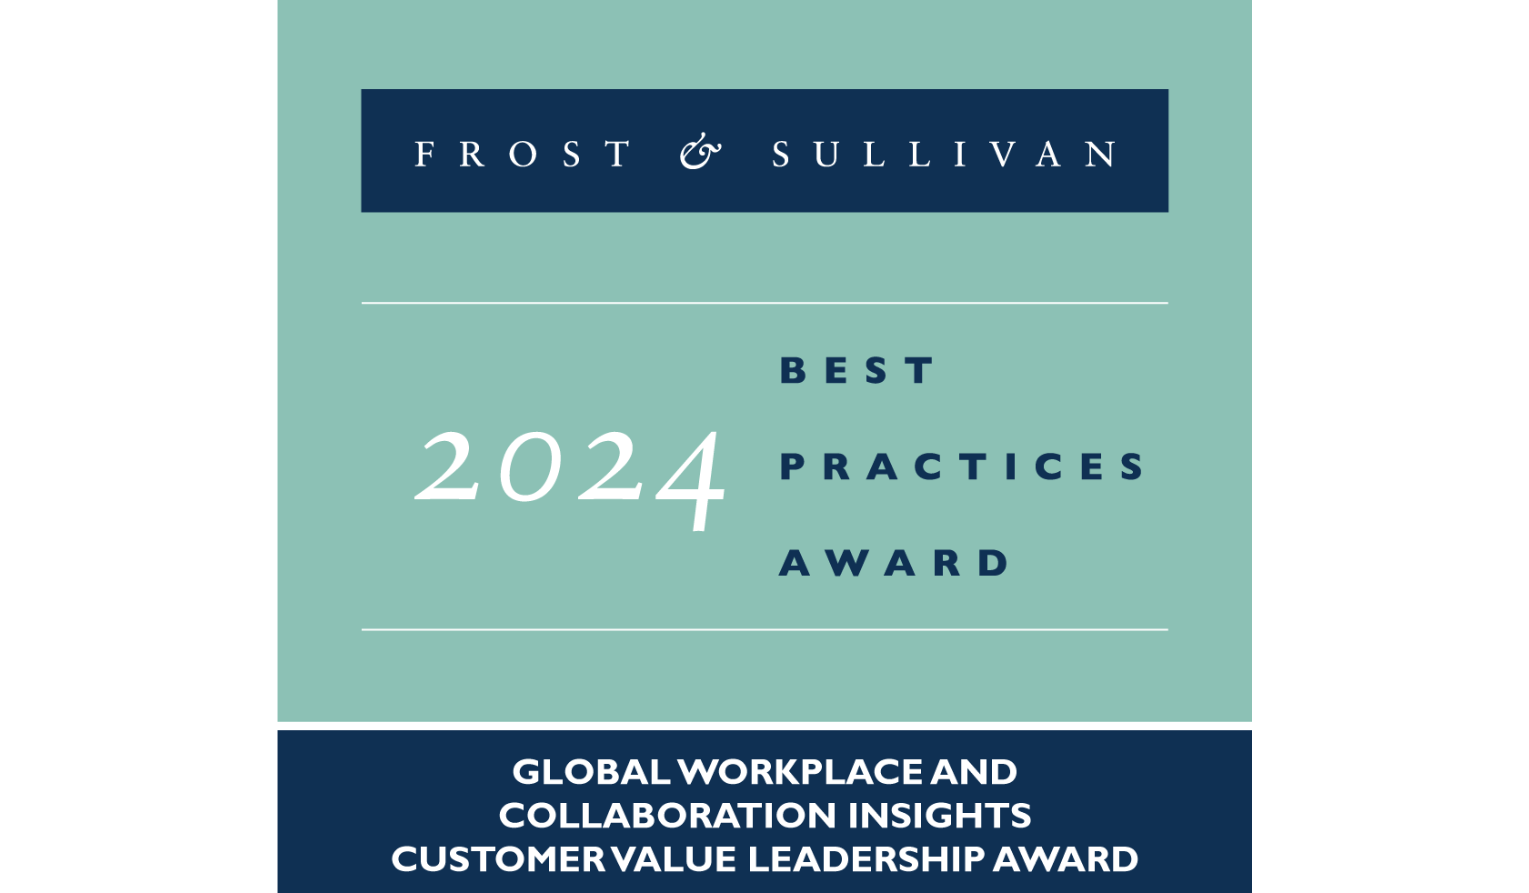 Vyopta is a Three-Time Recipient of the Frost & Sullivan Best Practices Award